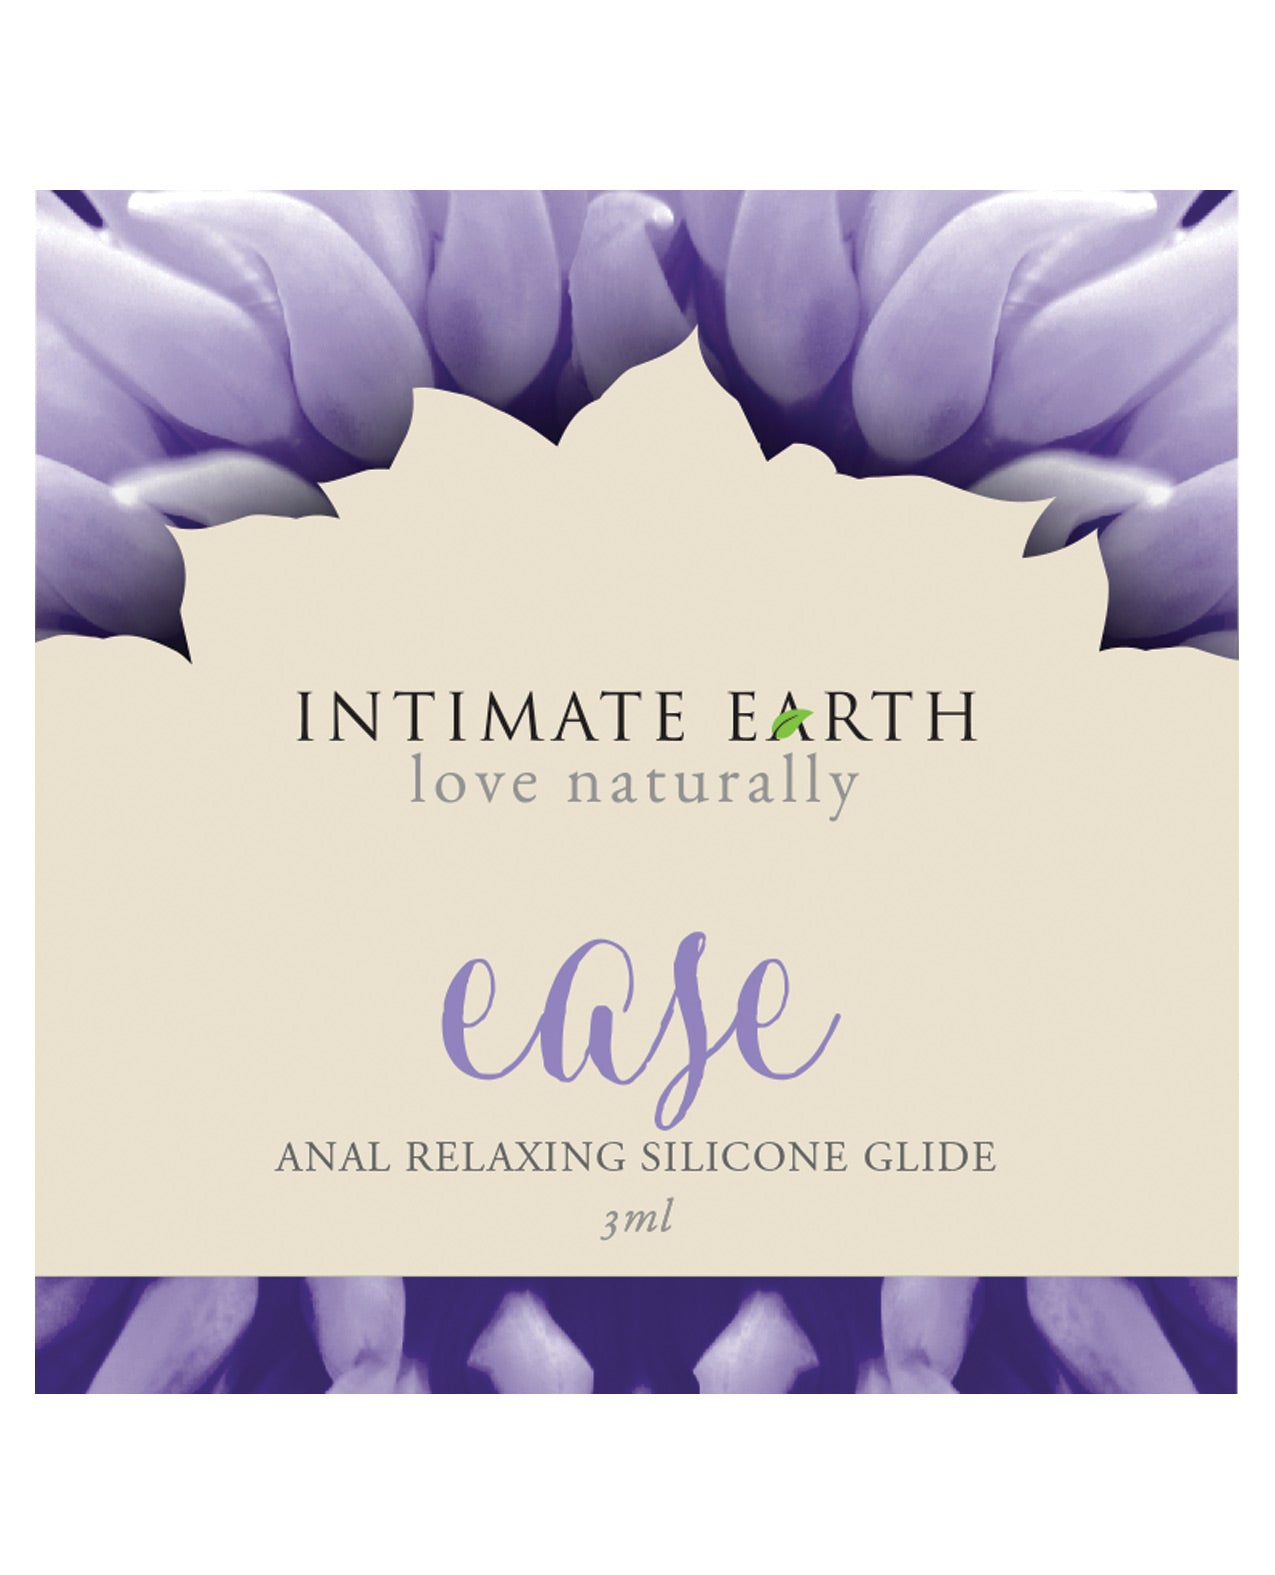 Intimate Earth Soothe Ease Bisabolol Anal Lubricant Foil